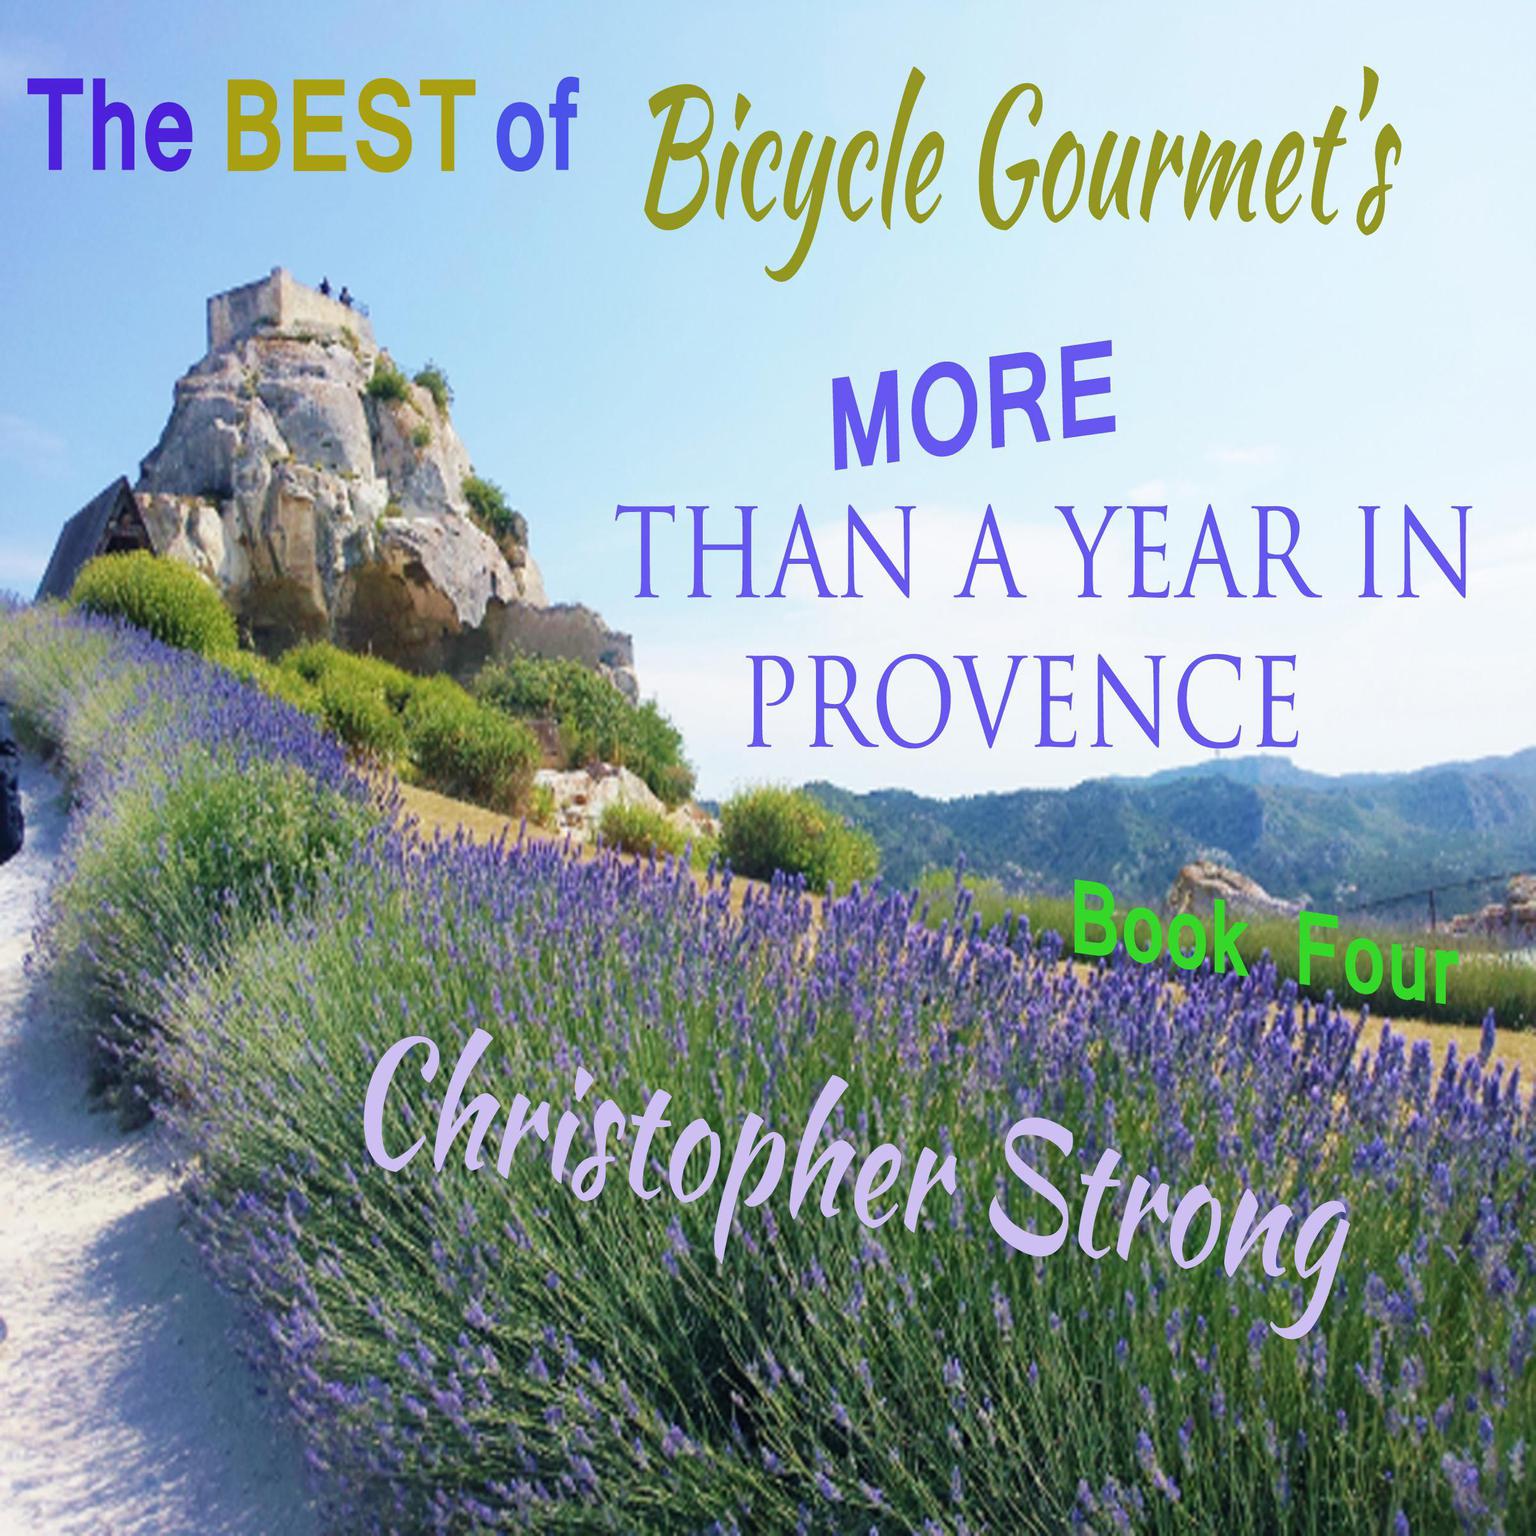 The Best of Bicycle Gourmets - More Than a Year in Provence - Book Four Audiobook, by Christopher Strong